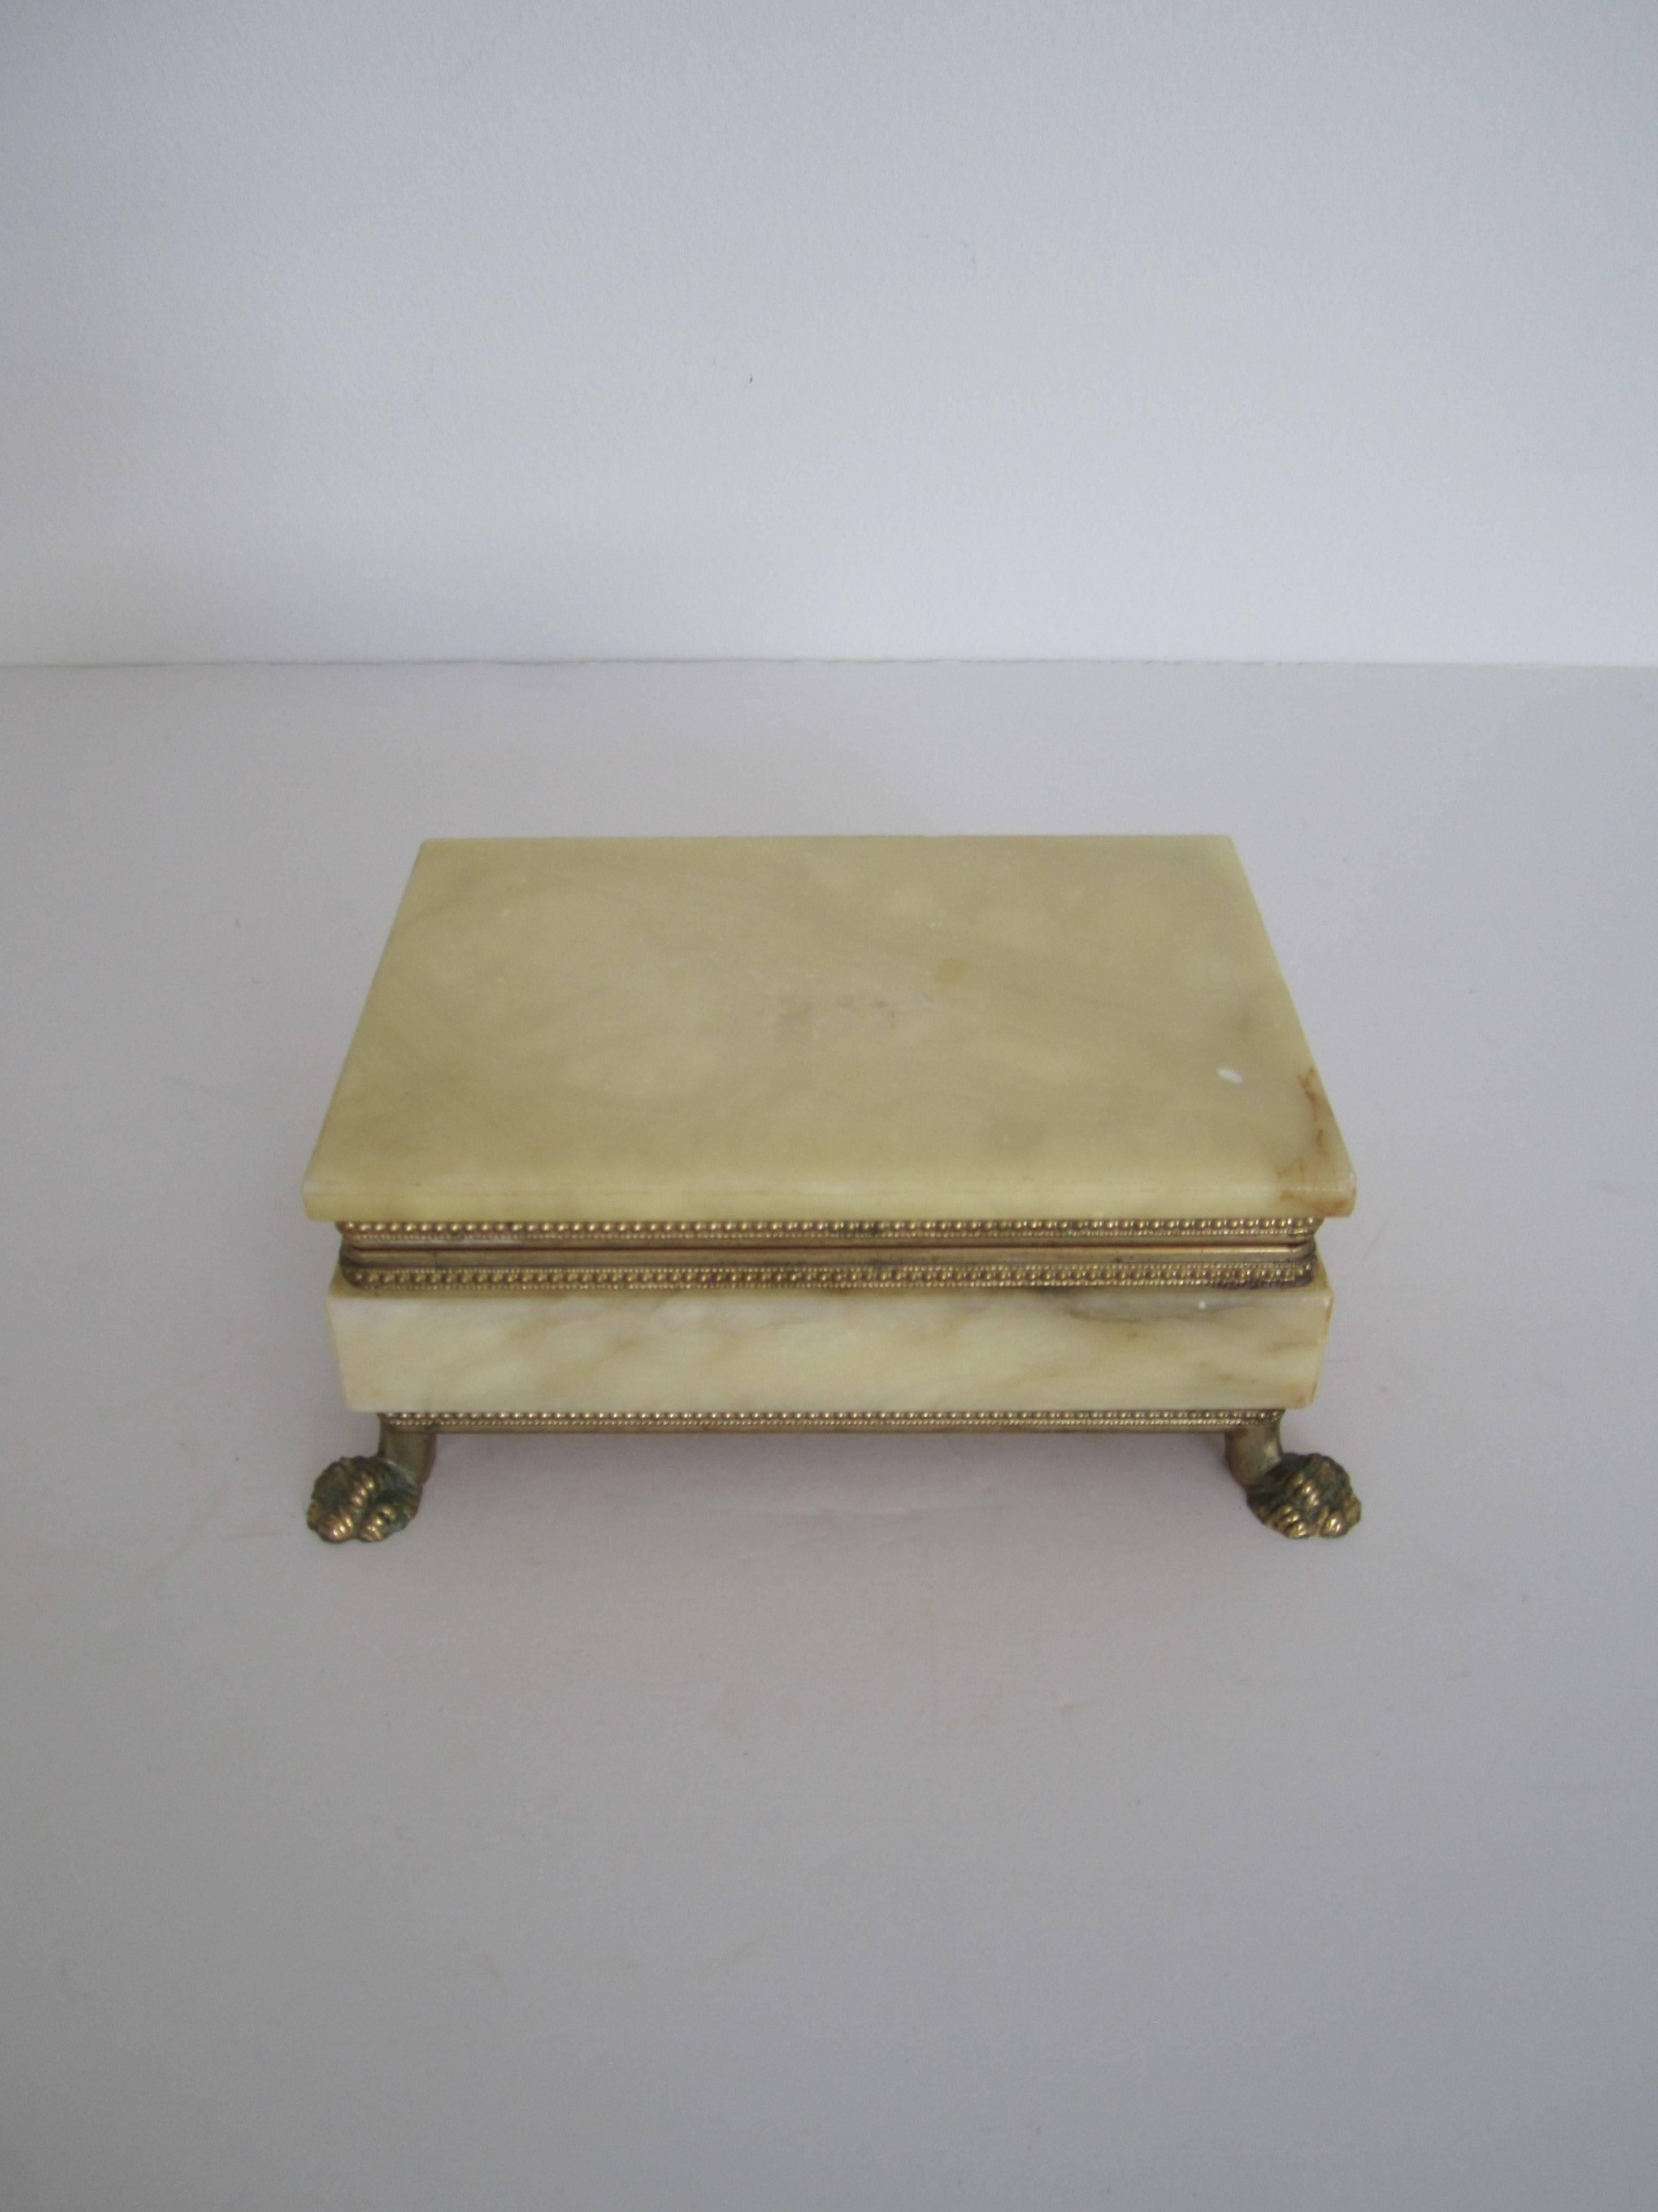 A Mid-20th century Italian alabaster marble and brass hinged box with paw feet, in the Regency style, Italy. Marked on bottom of box 'Made in Italy' as show in image #11. Alabaster marble is a cream color hue with a brass frame and hinge and